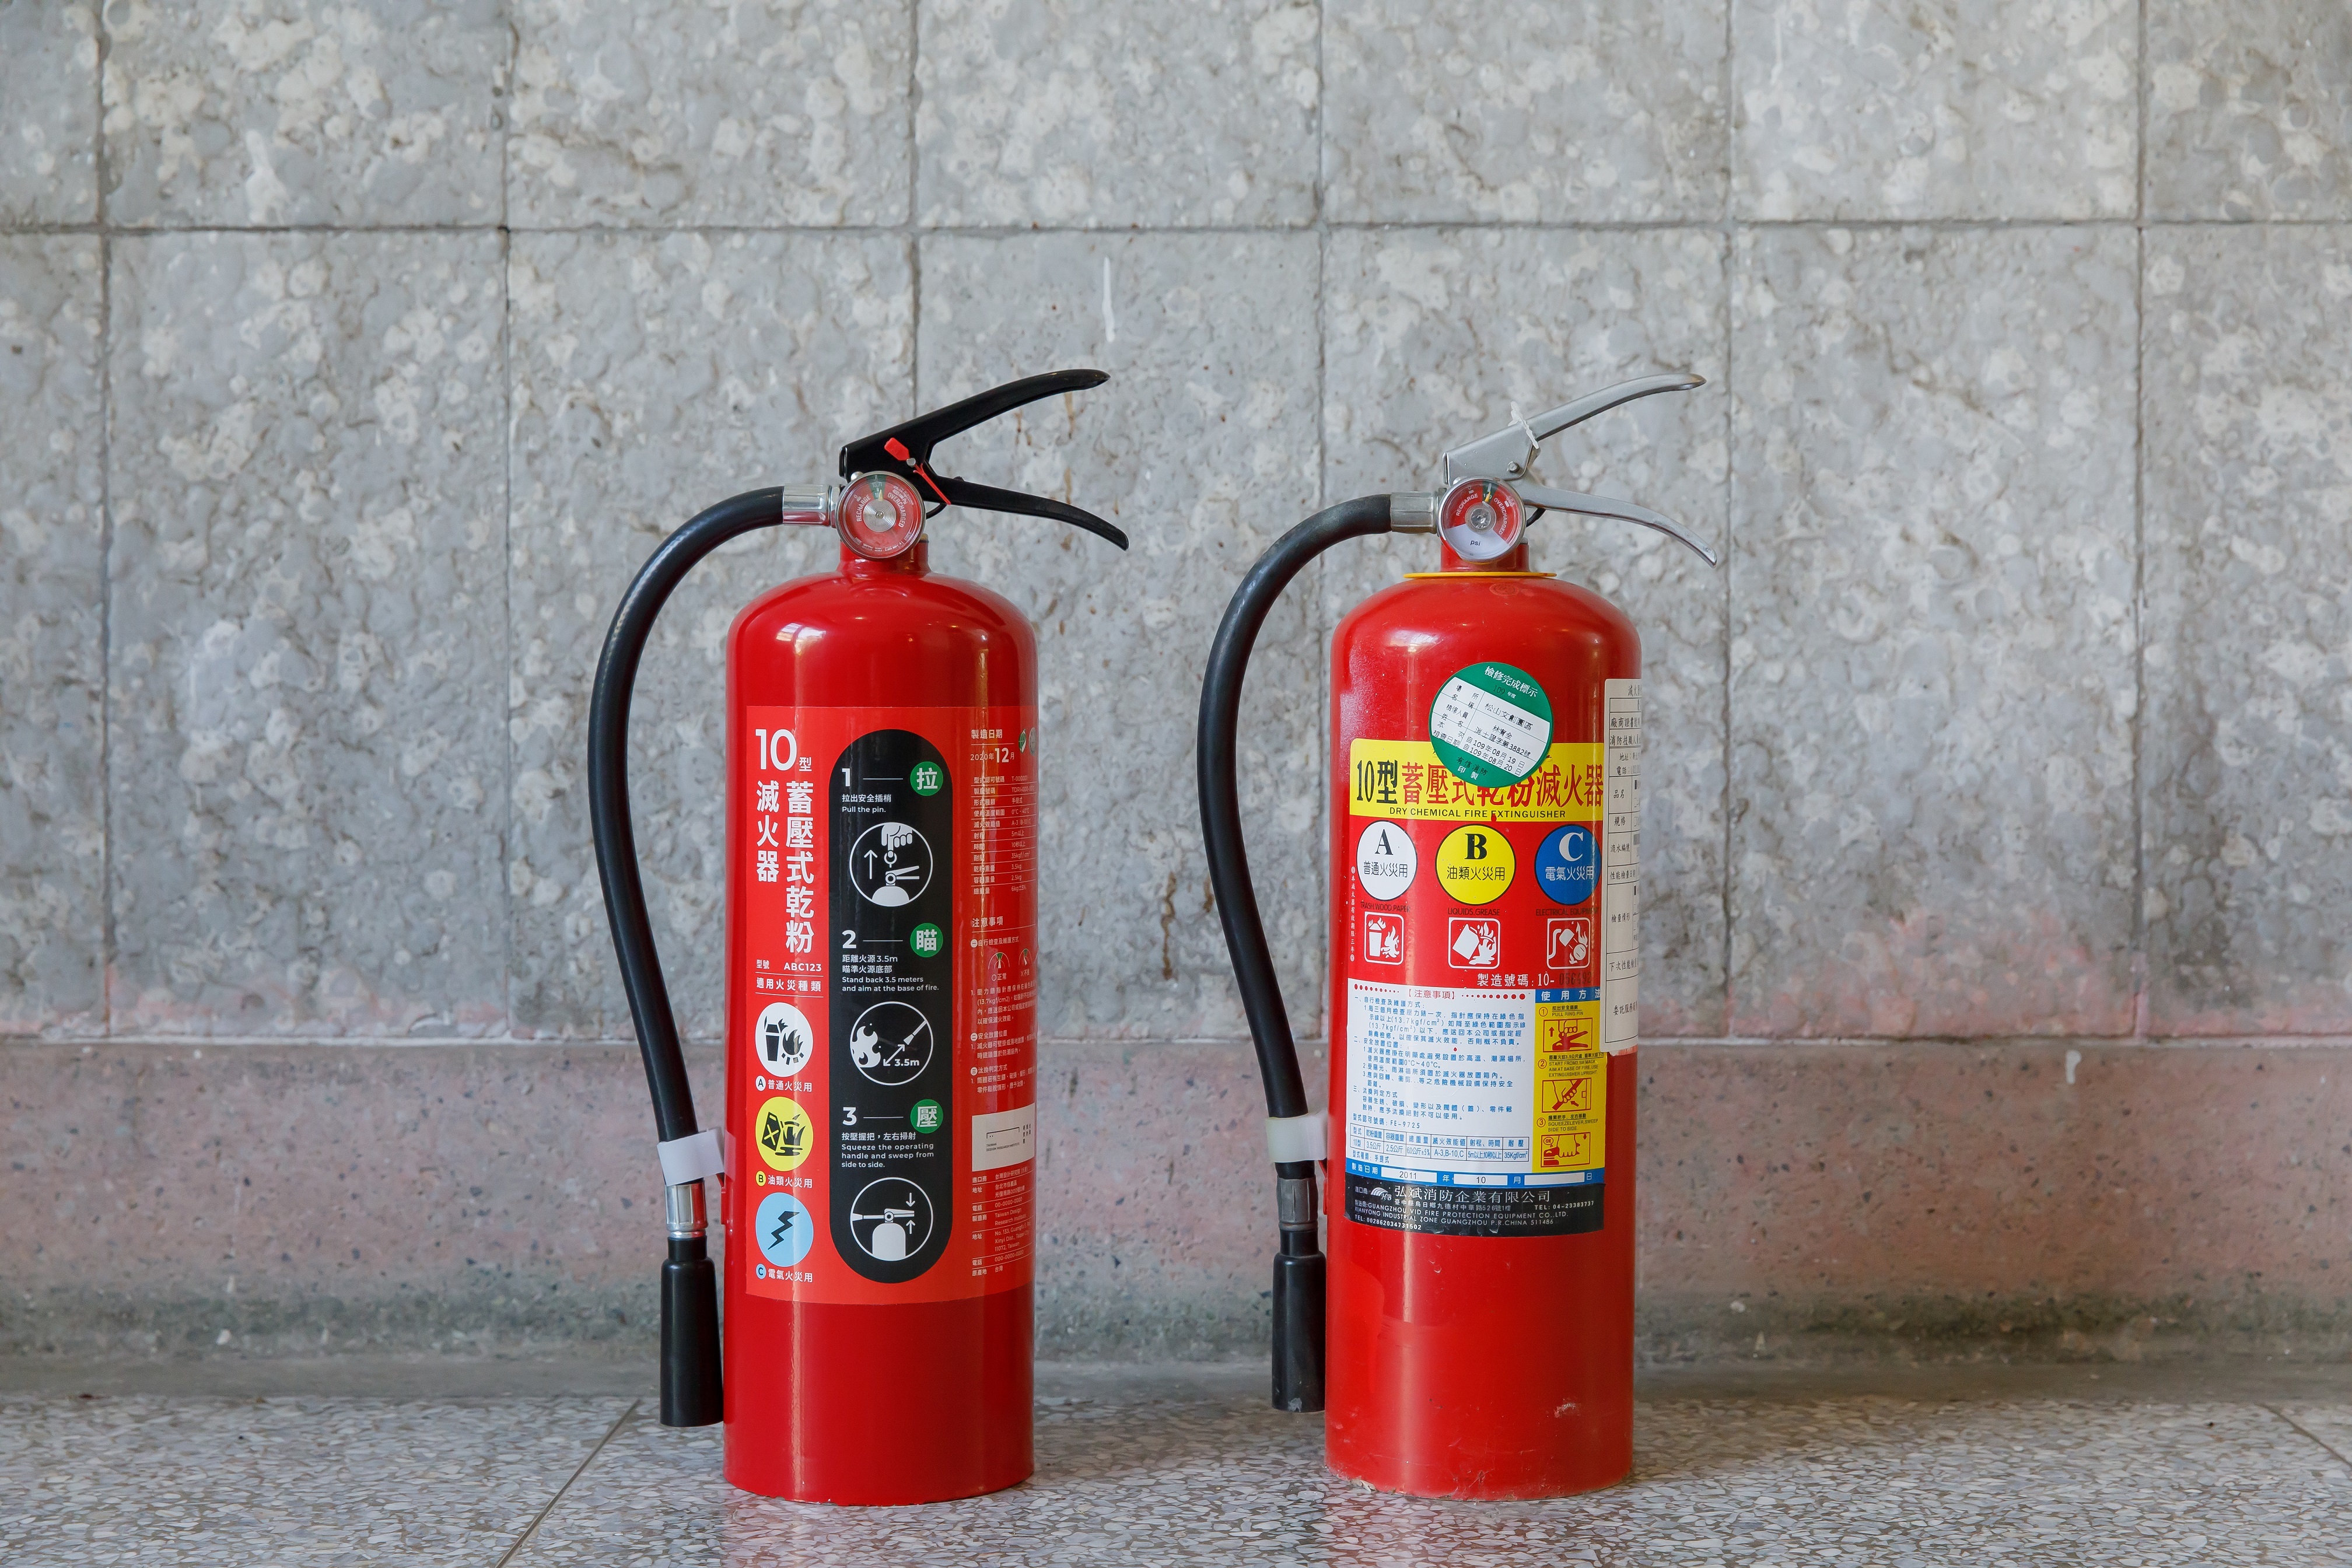 Taiwan Public fire safety equipment redesign